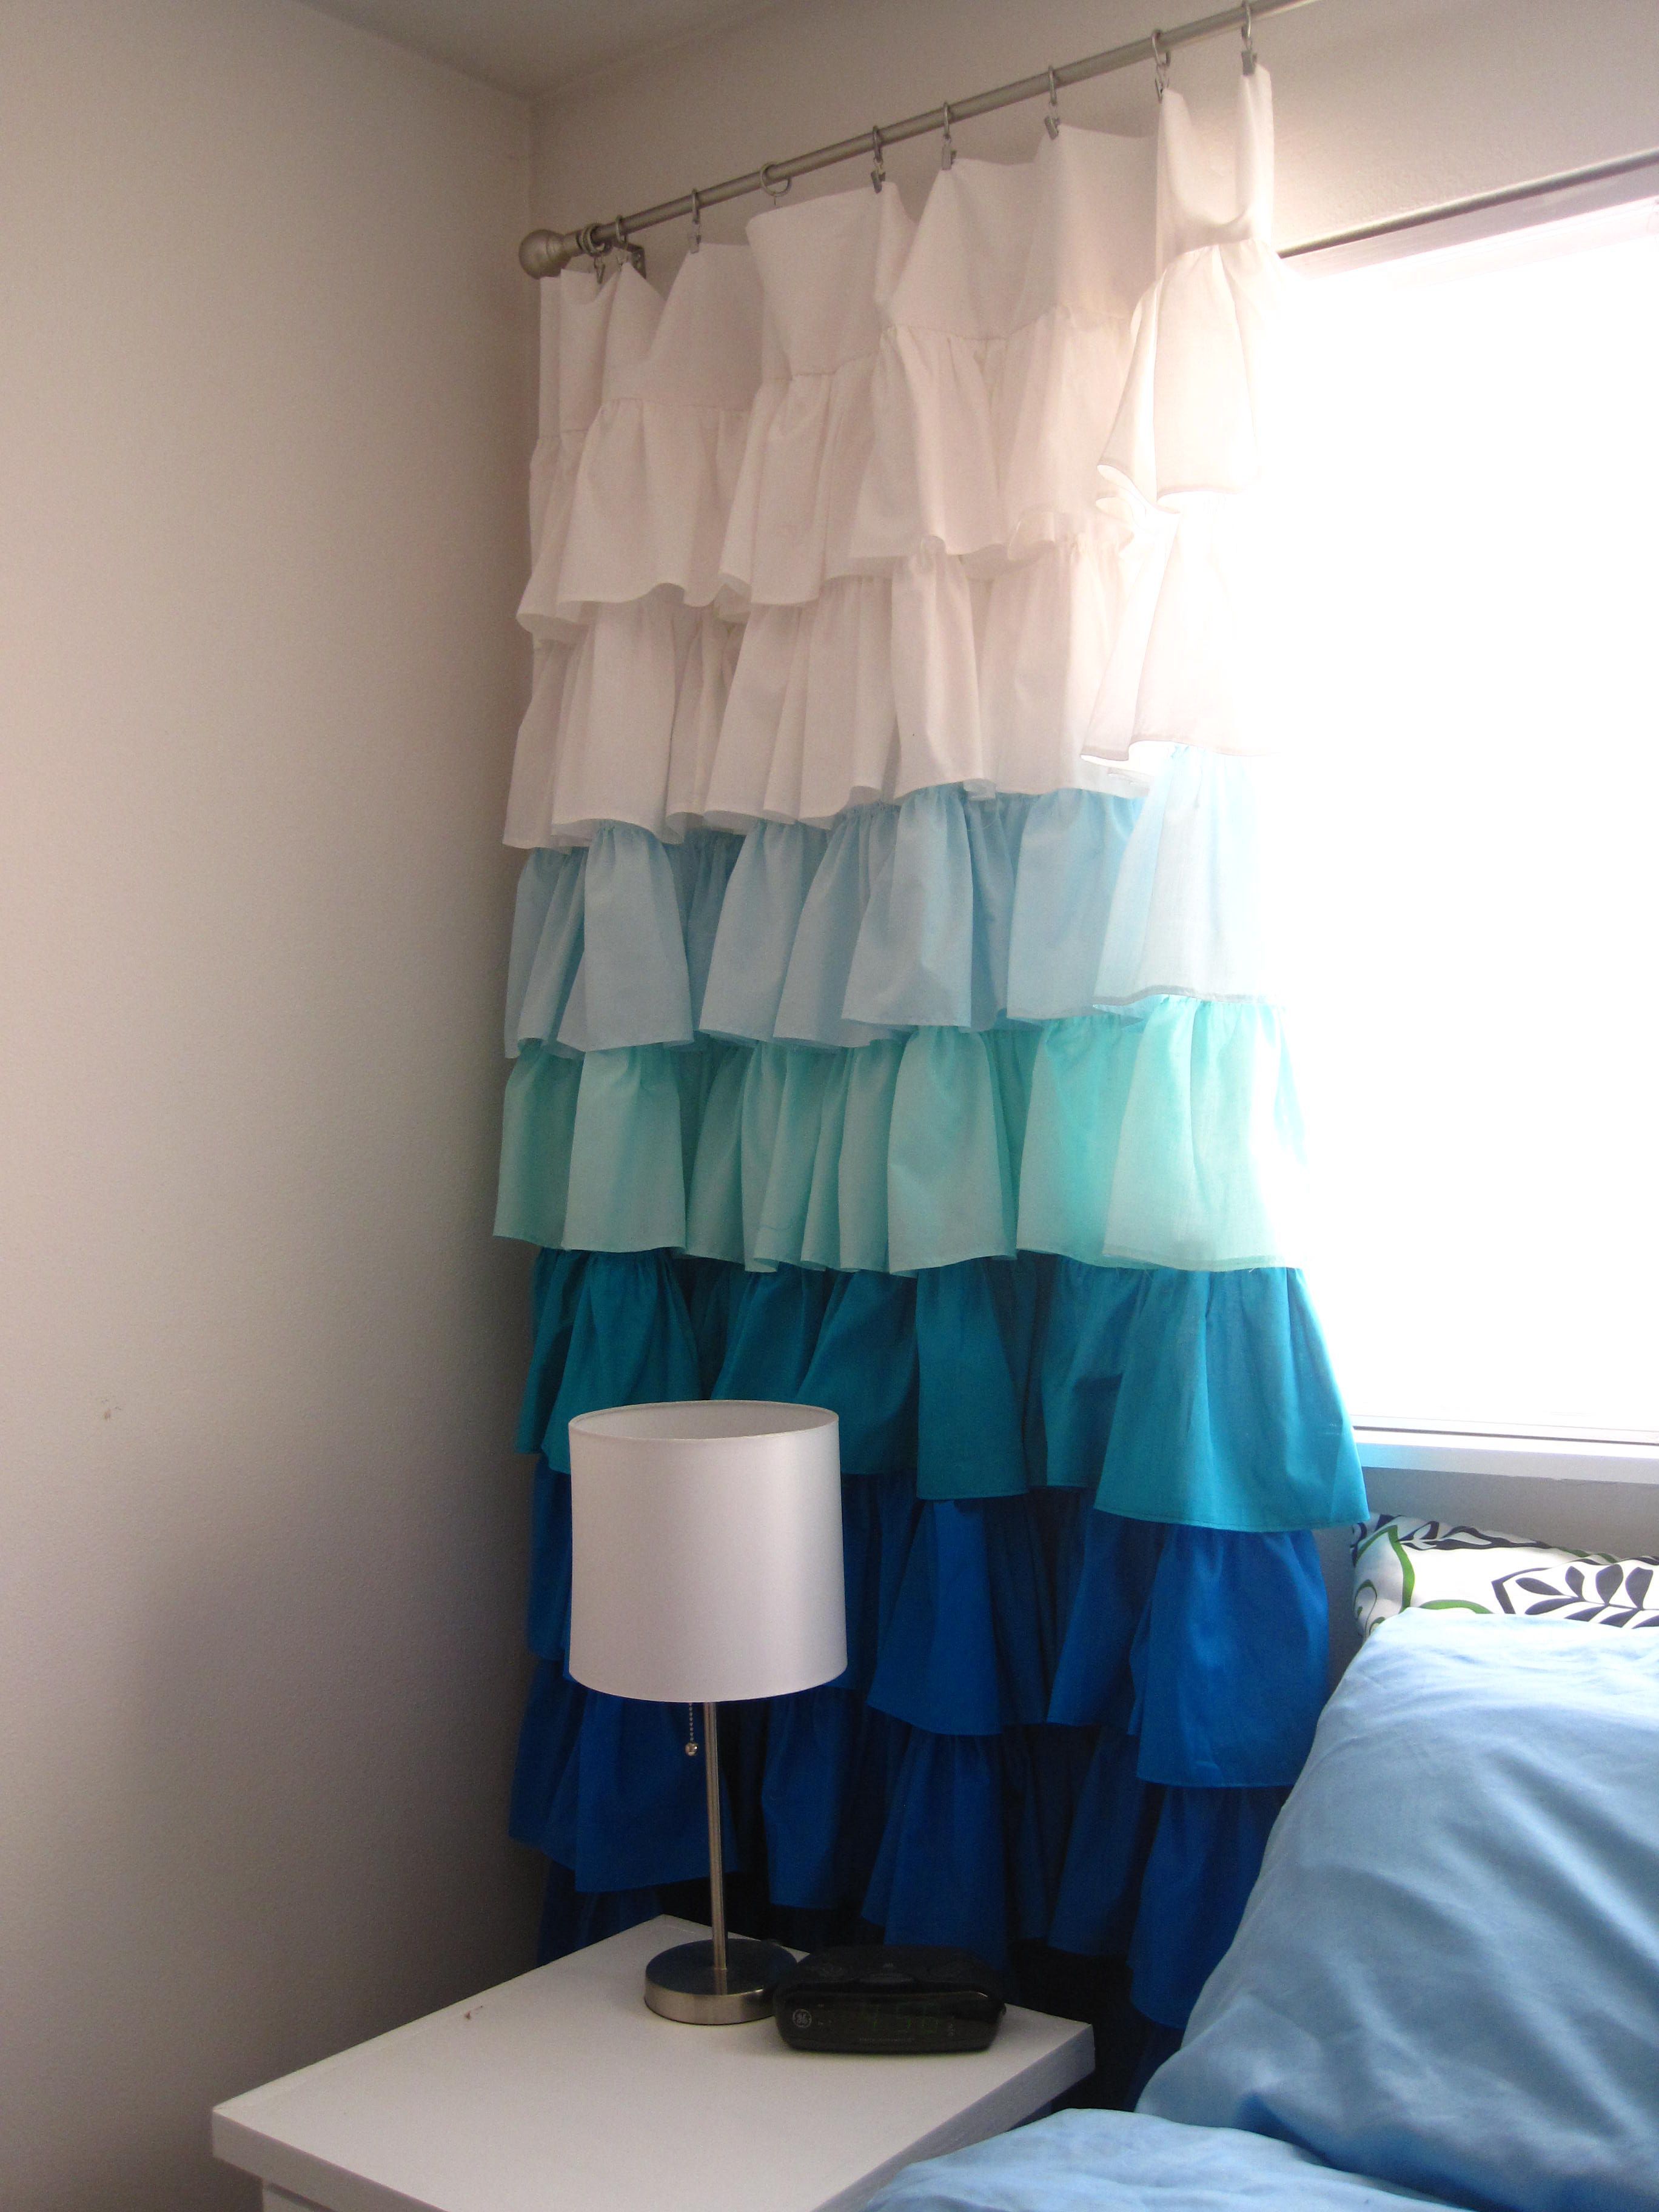 Cute DIY curtains – Would love to have something like this for nursery doorway.